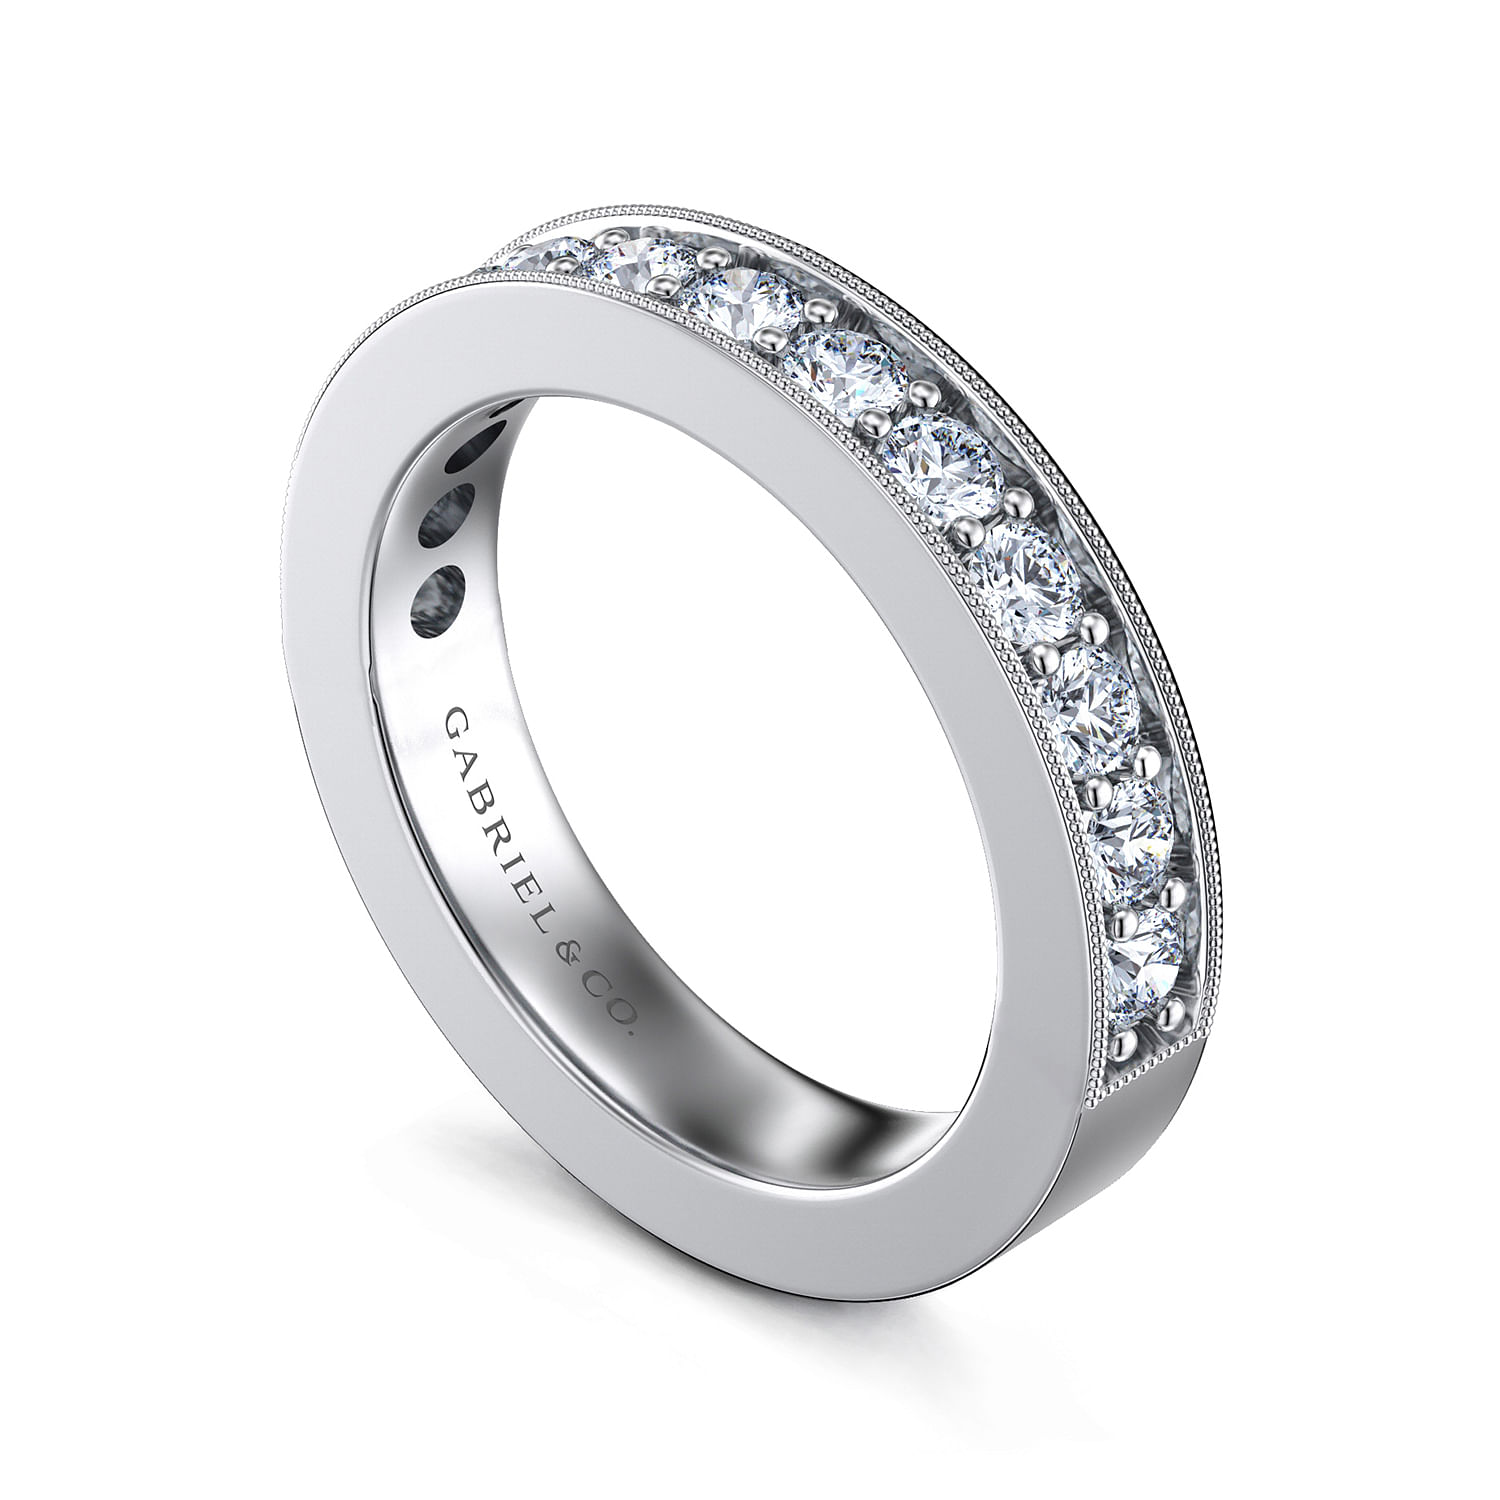 14K White Gold Channel Prong Diamond Anniversary Band with Millgrain